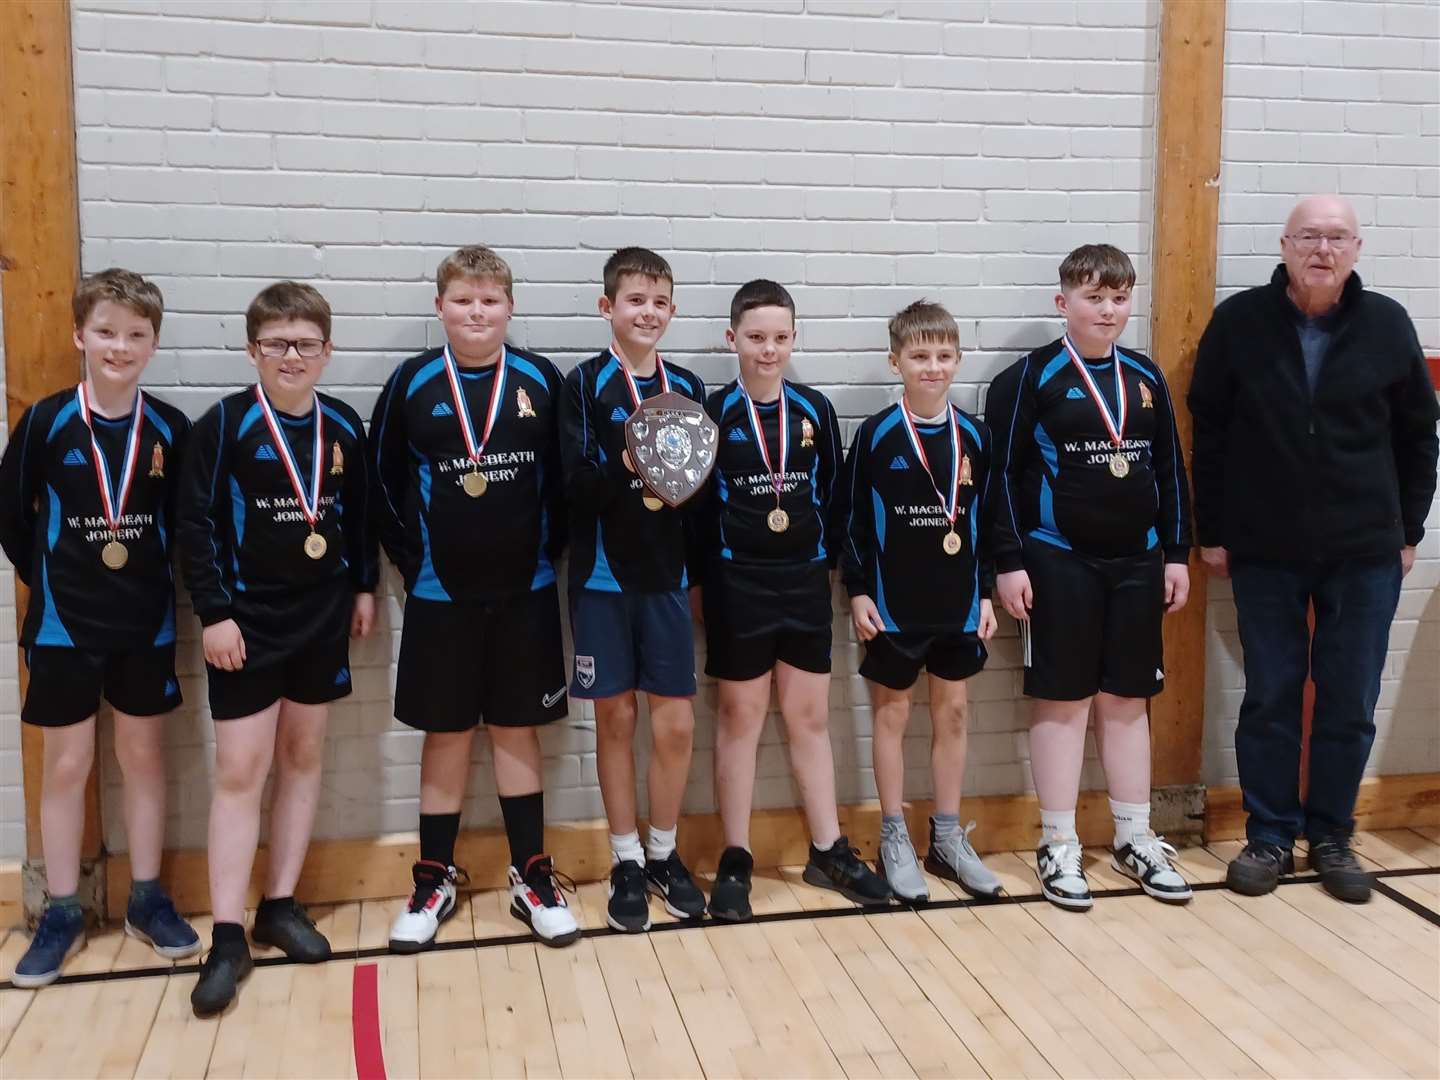 Golspie Primary School scooped the top place in the Big Schools boys' category.